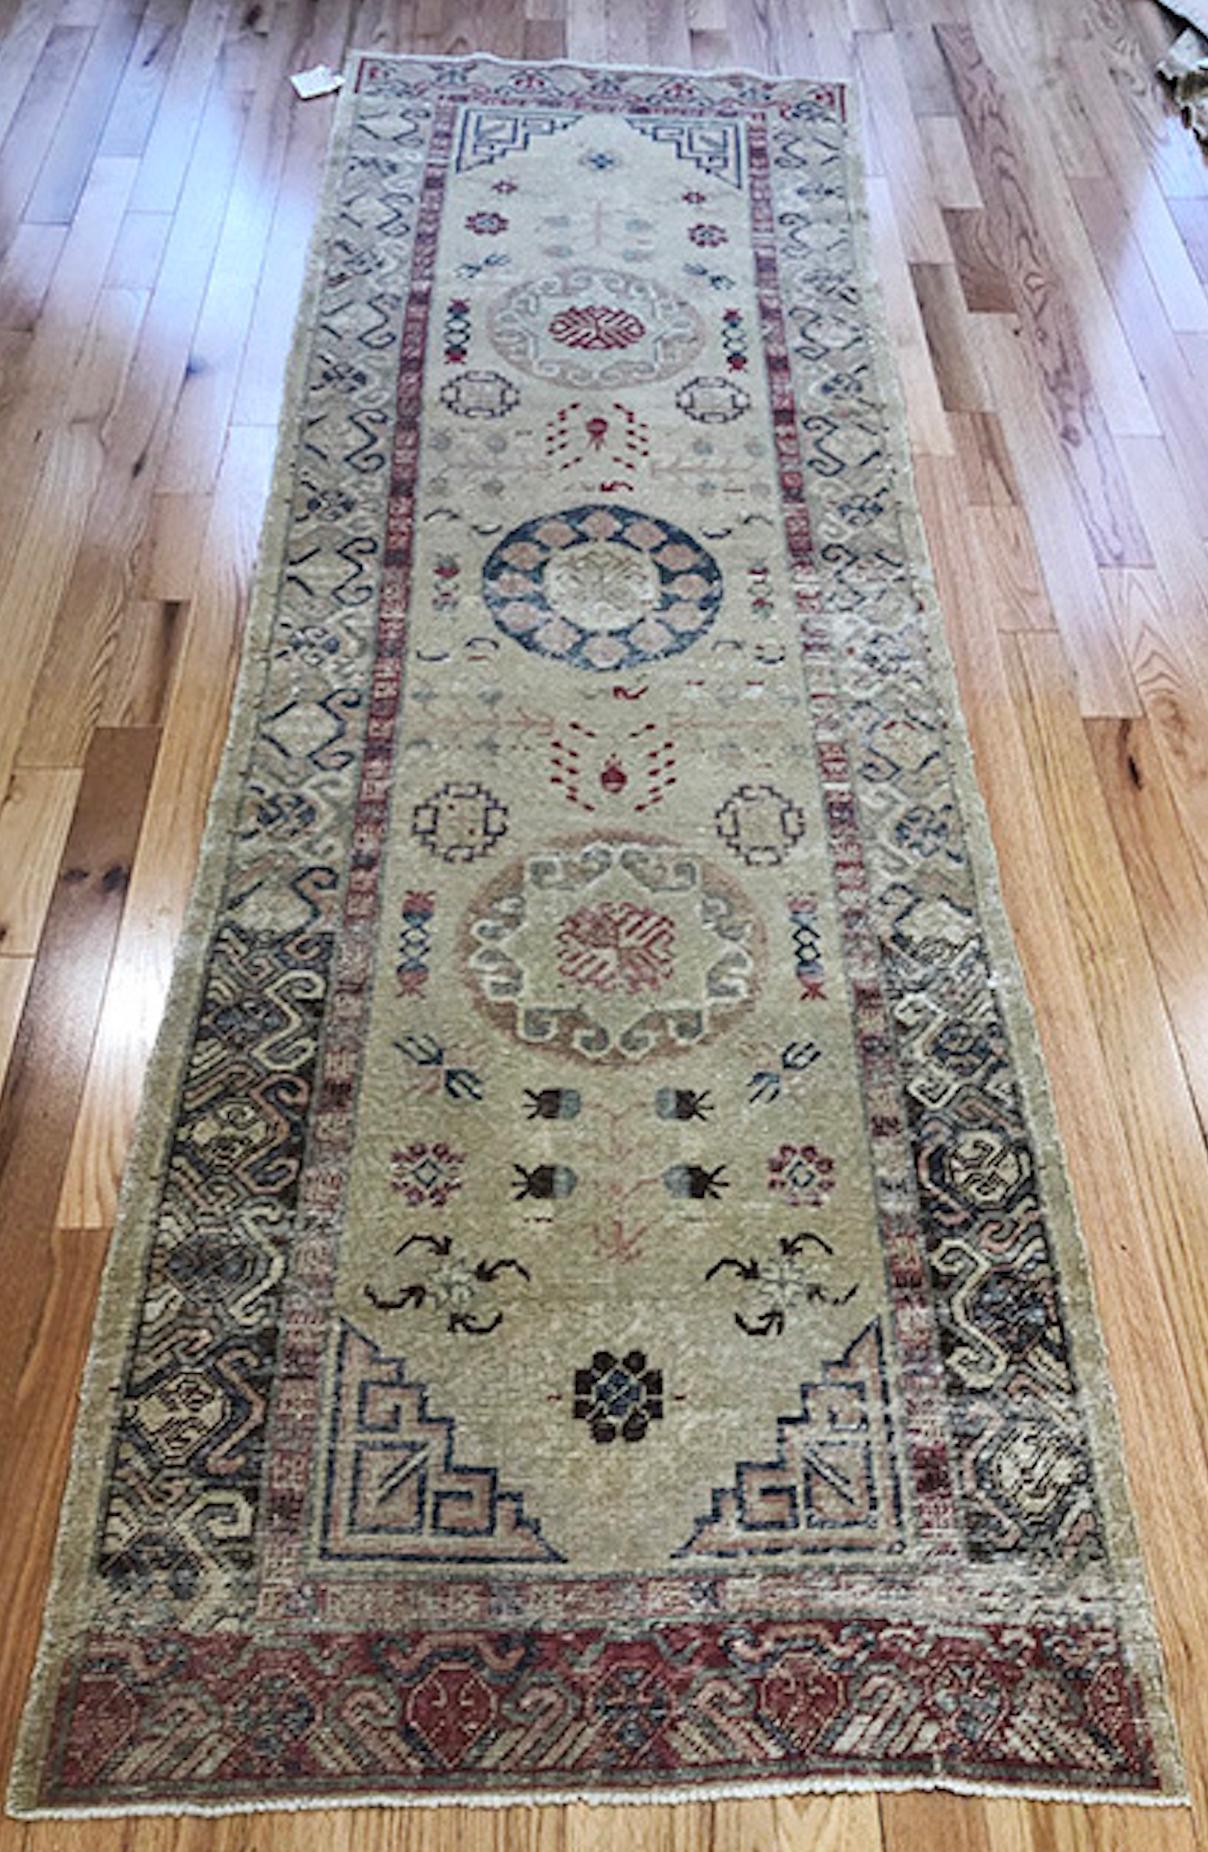 Orgin: Mongolia
Dimensions: 10' x 3’4?
Age: 1920’s
Design: Khotan
Material: 100% Wool-pile
Color: Wheat, Rust, Navy Blue, Beige

7134

An epitome of history, character and culture, Antique Khotan rugs add richness to a room. Produced in